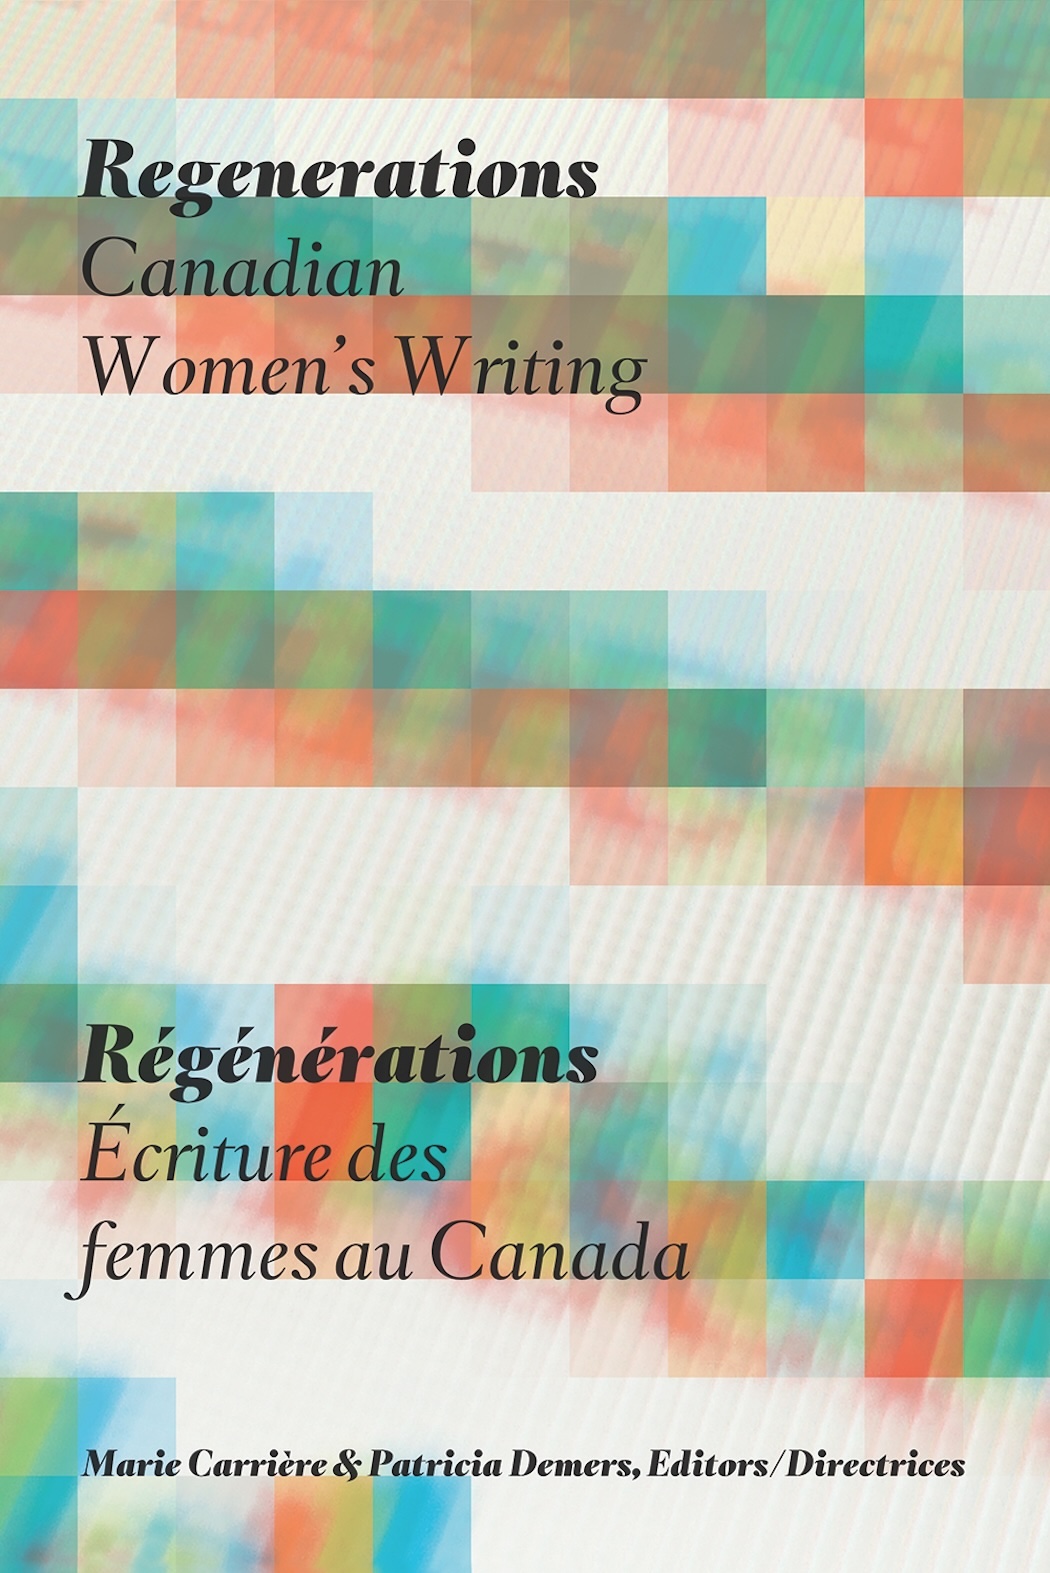 Cover Image of Regenerations Canadian Women's Writing